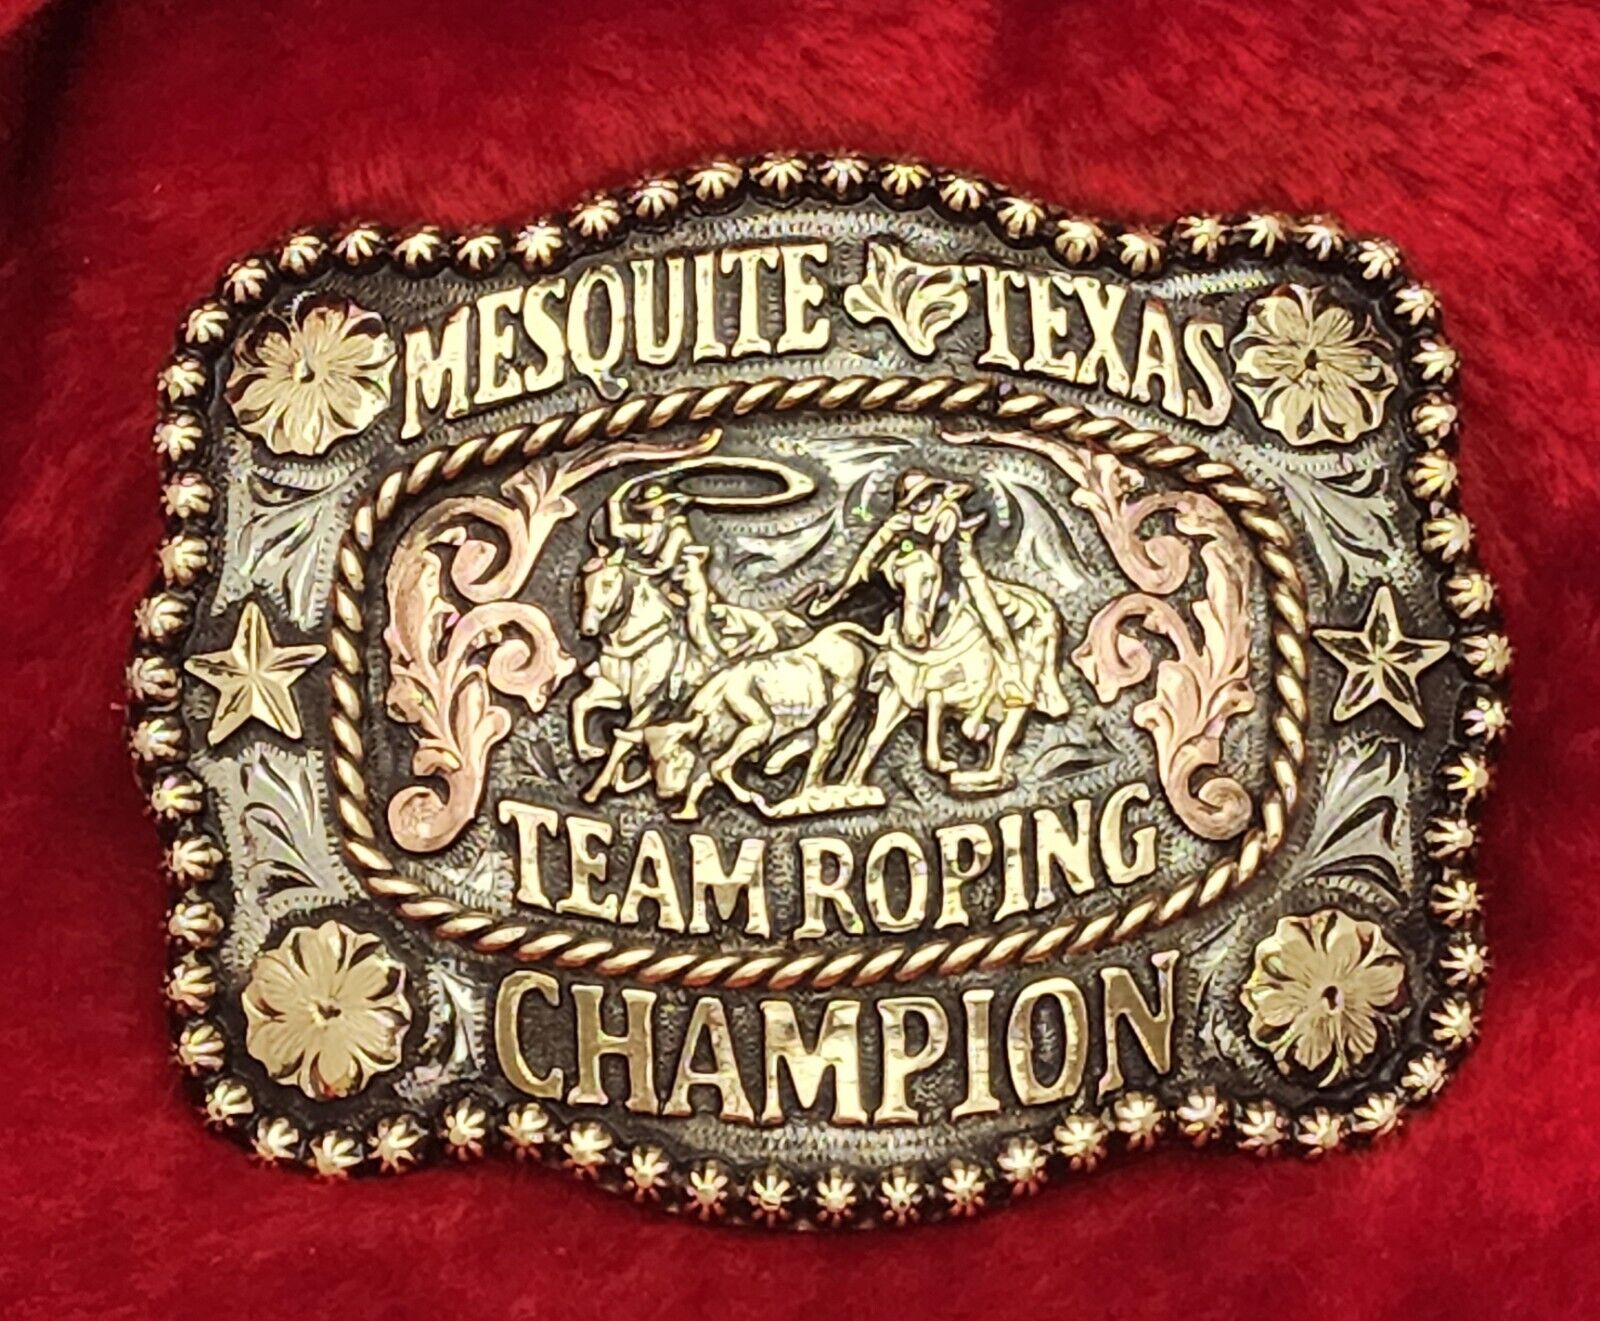 MESQUITE PRO RODEO TEAM ROPING CHAMPION TROPHY BUCKLE☆TEXAS☆RARE #779